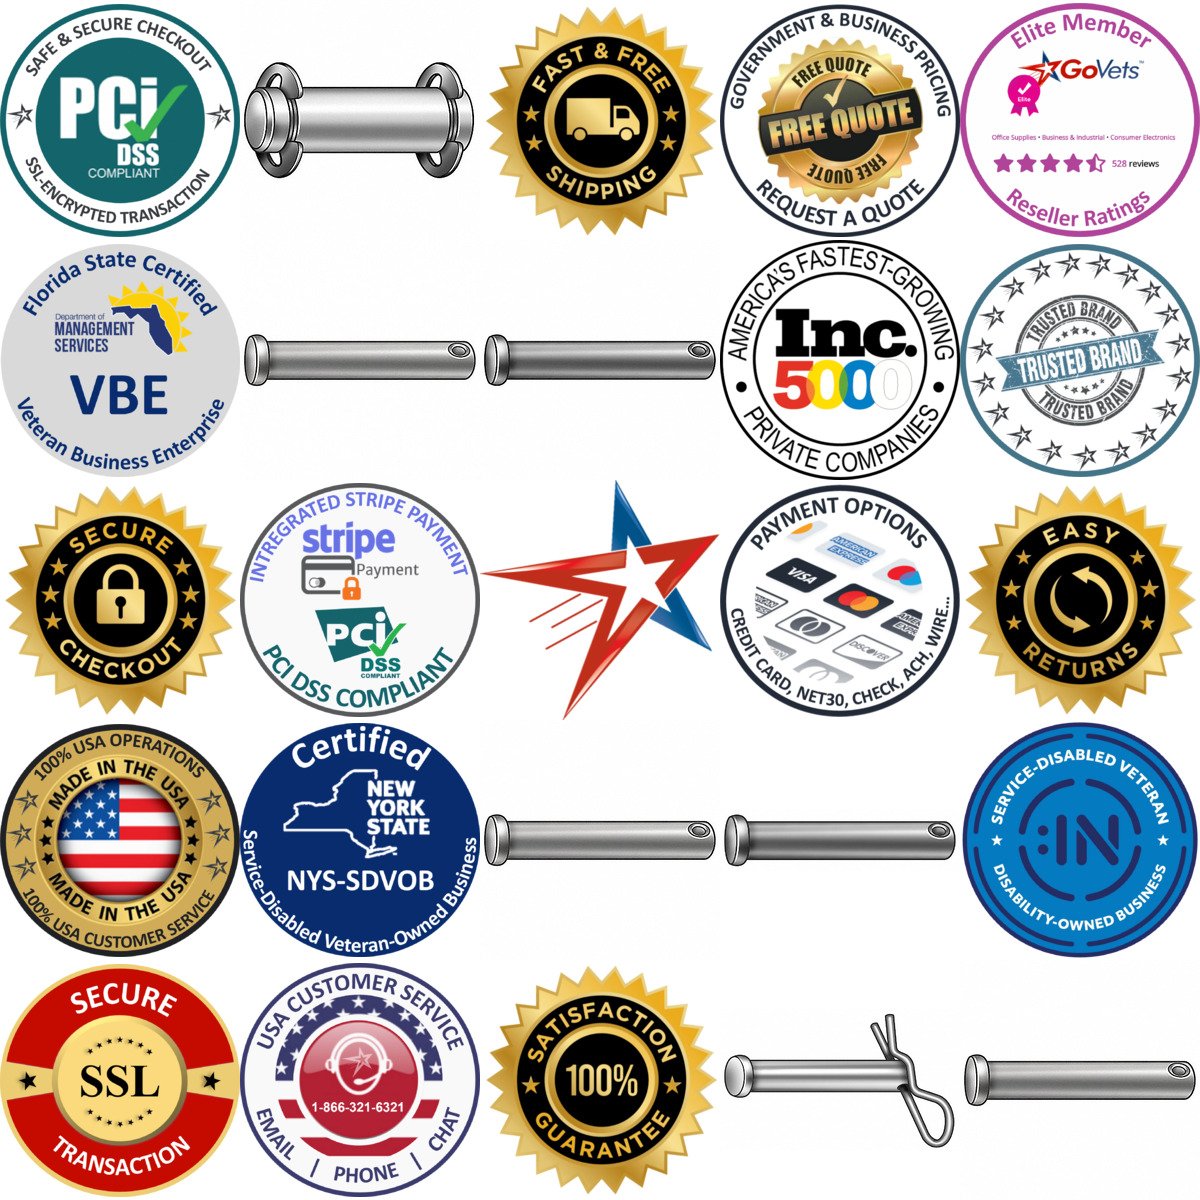 A selection of Clevis Pins products on GoVets